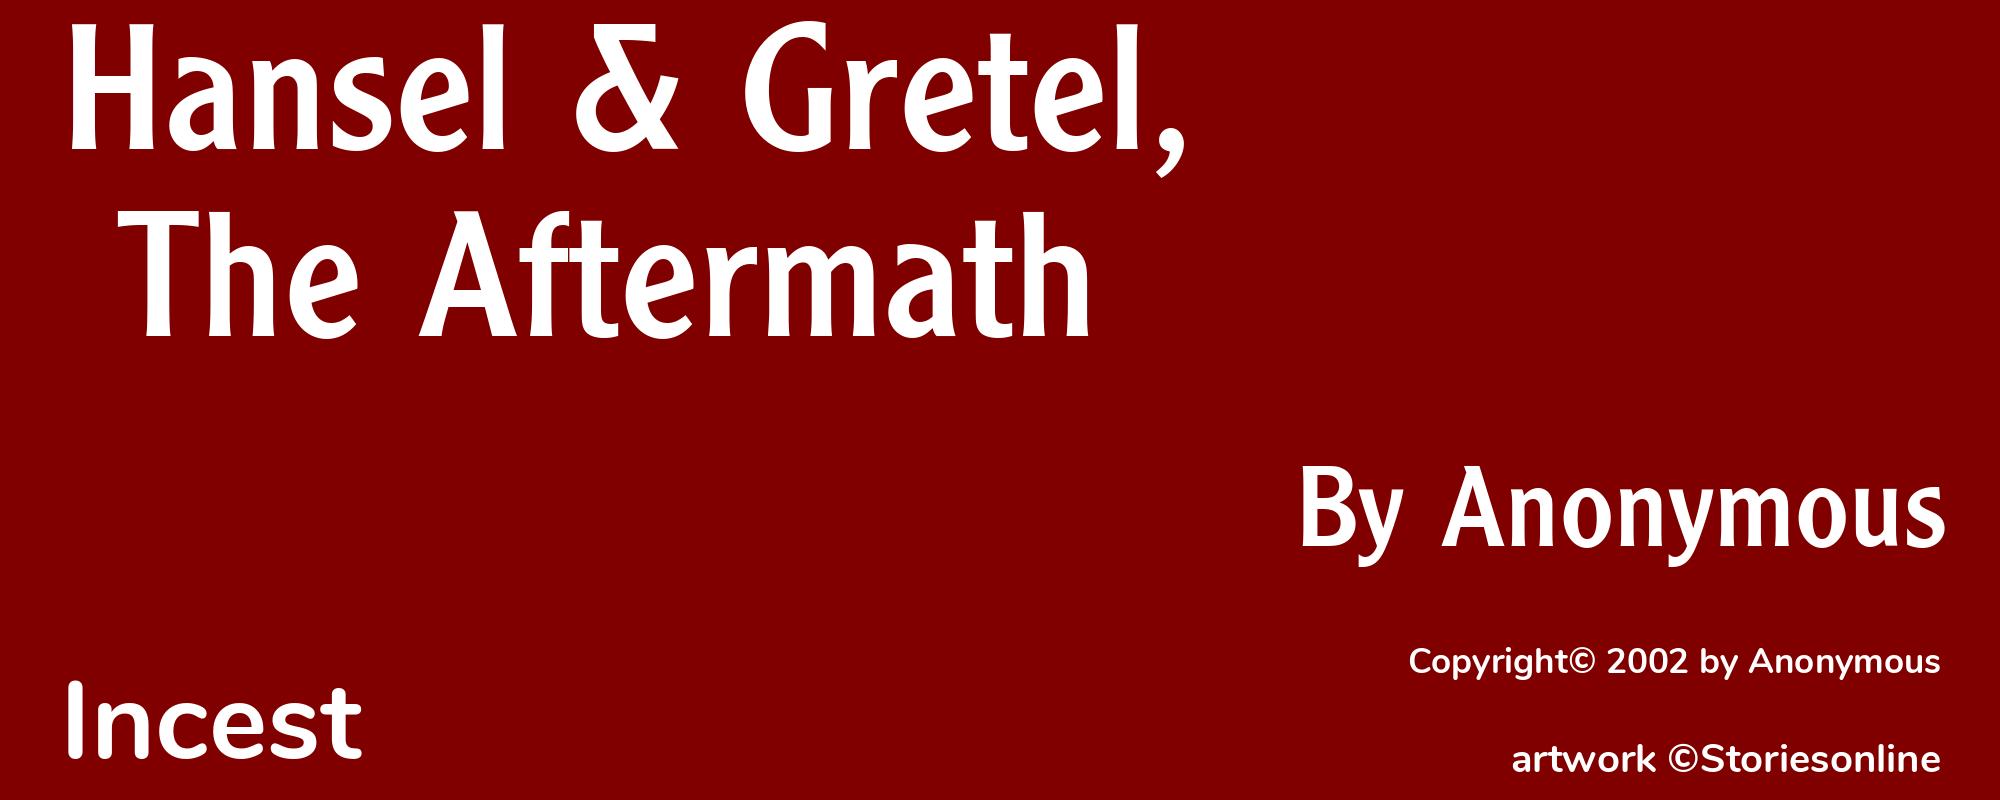 Hansel & Gretel, The Aftermath - Cover